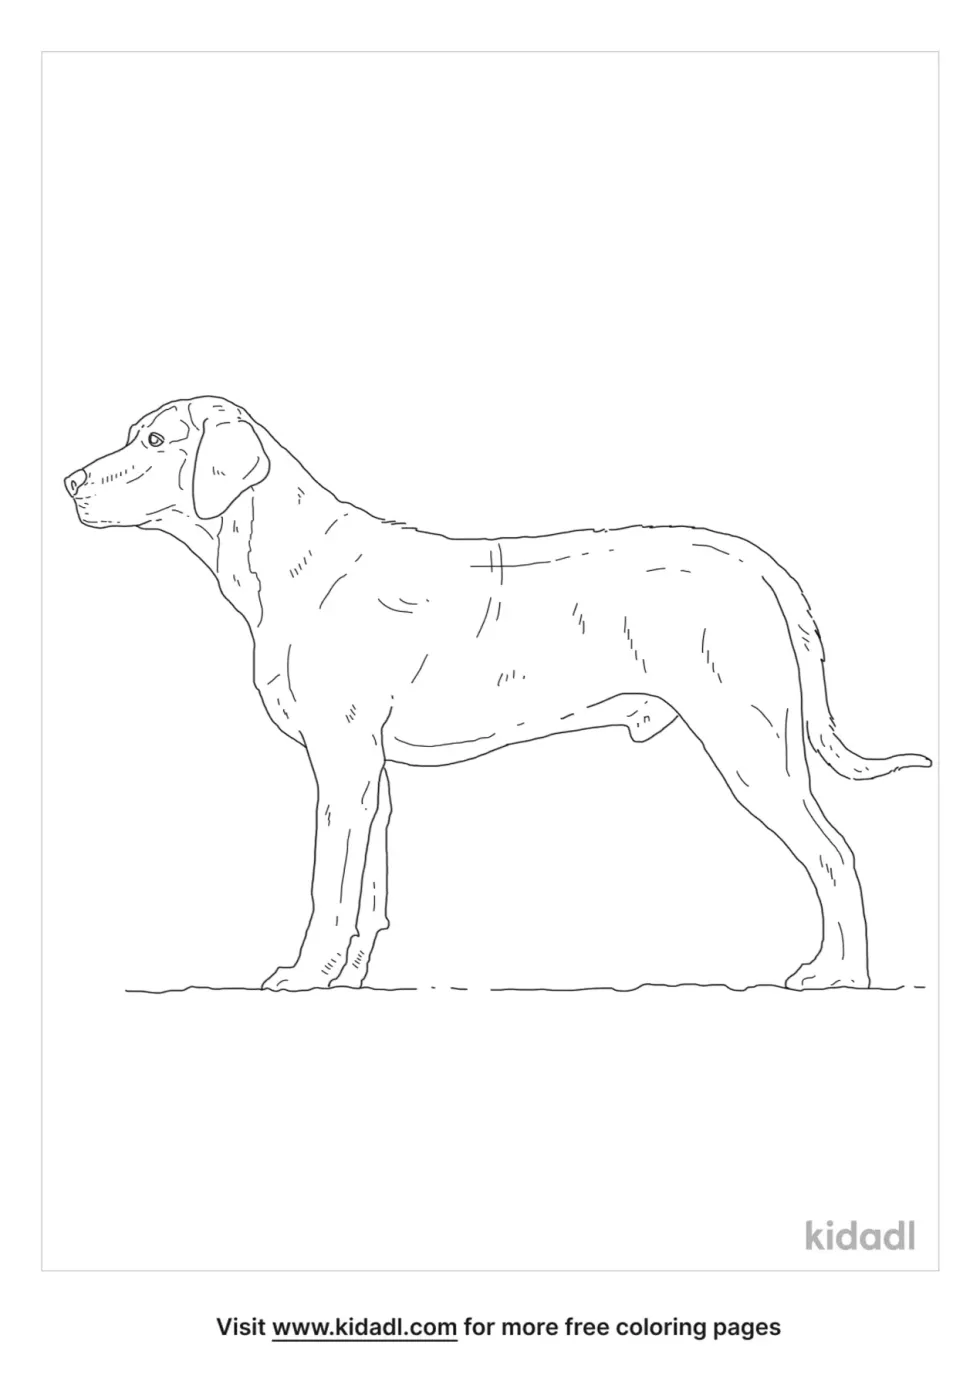 American Leopard Hound Coloring Page